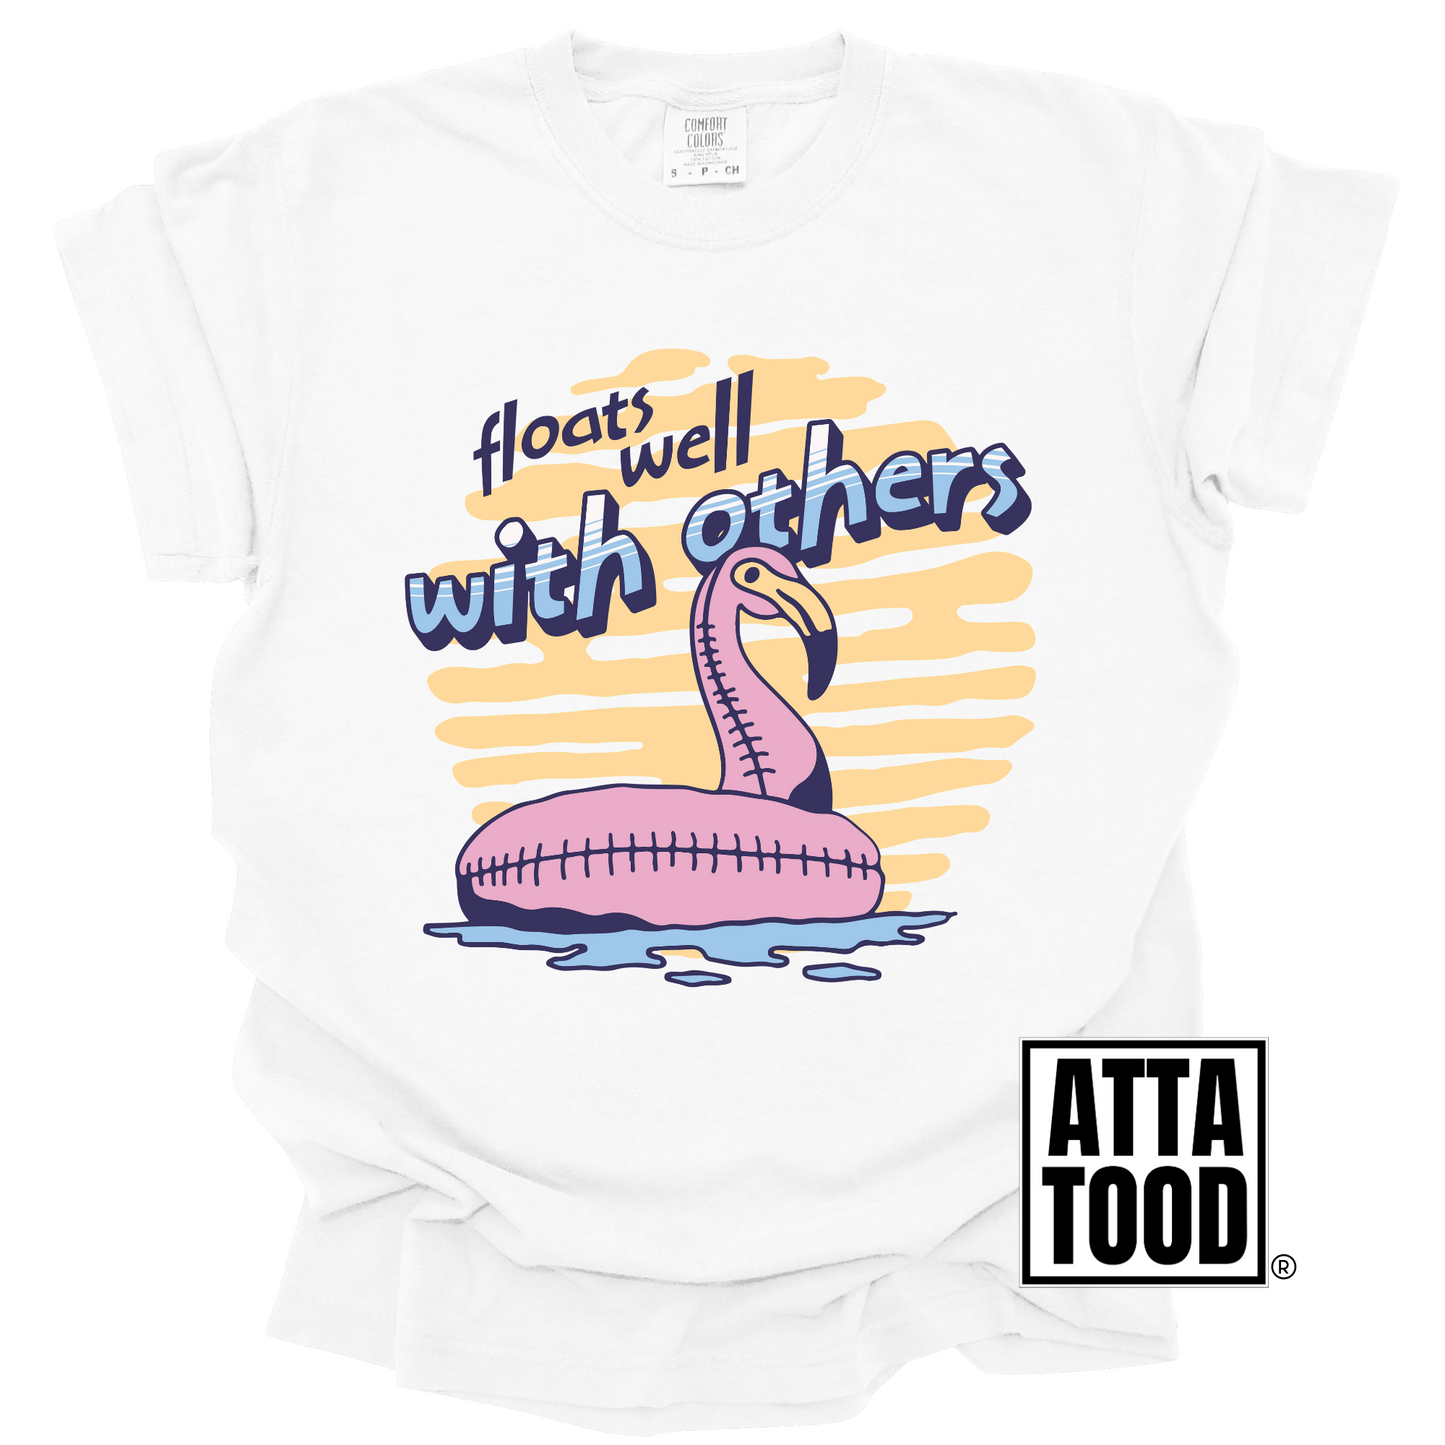 Floats well with others tee